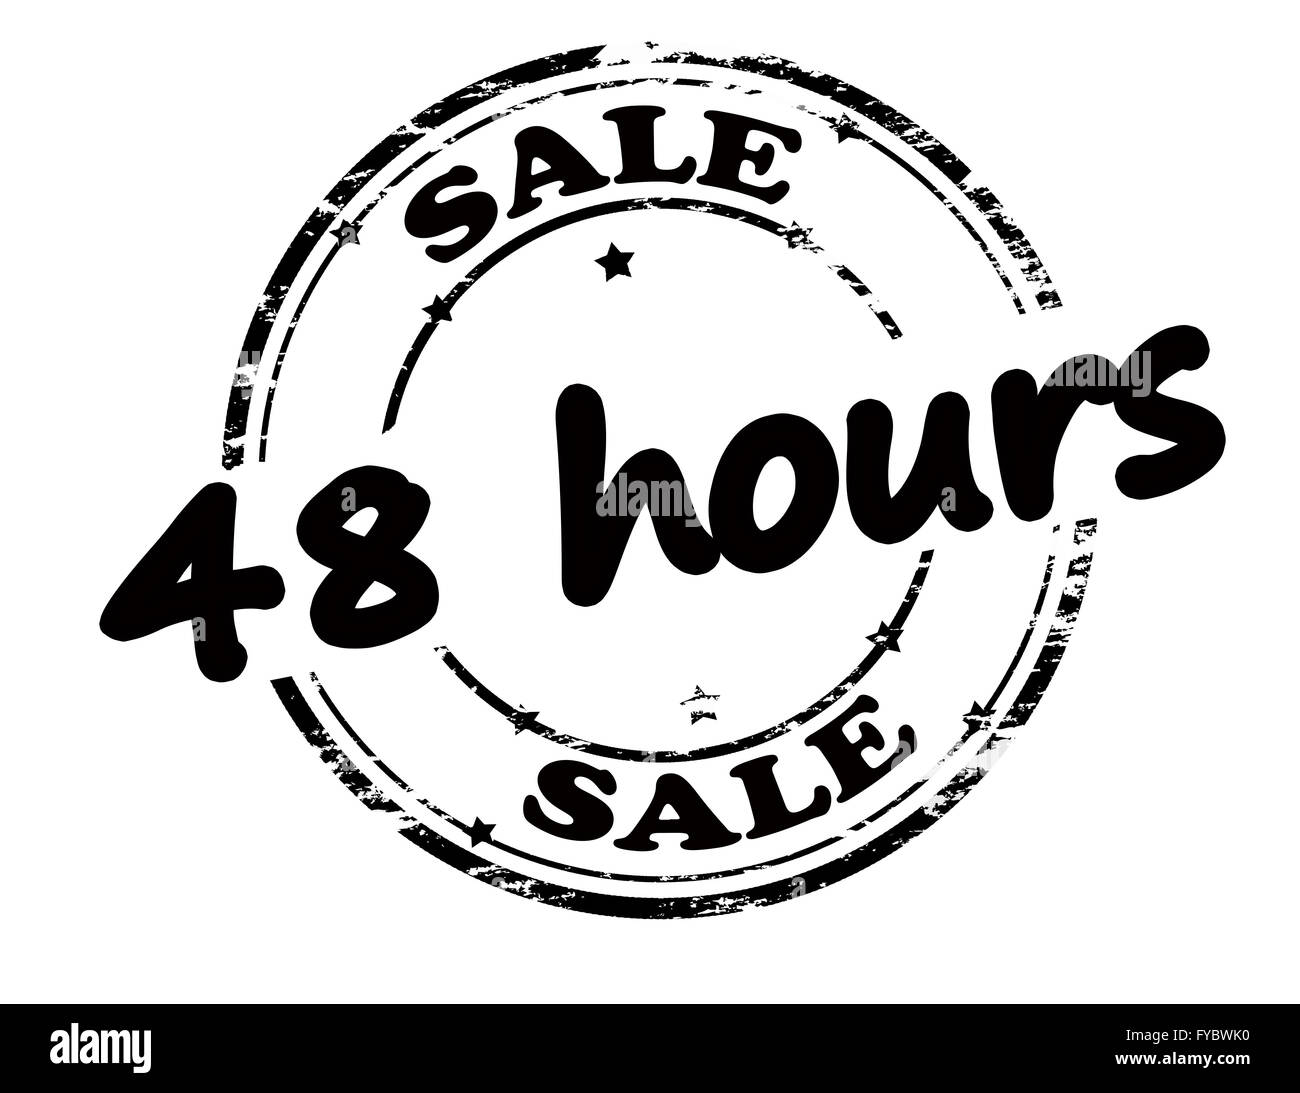 Rubber stamp with text sale forty eight hours inside, vector illustration Stock Photo